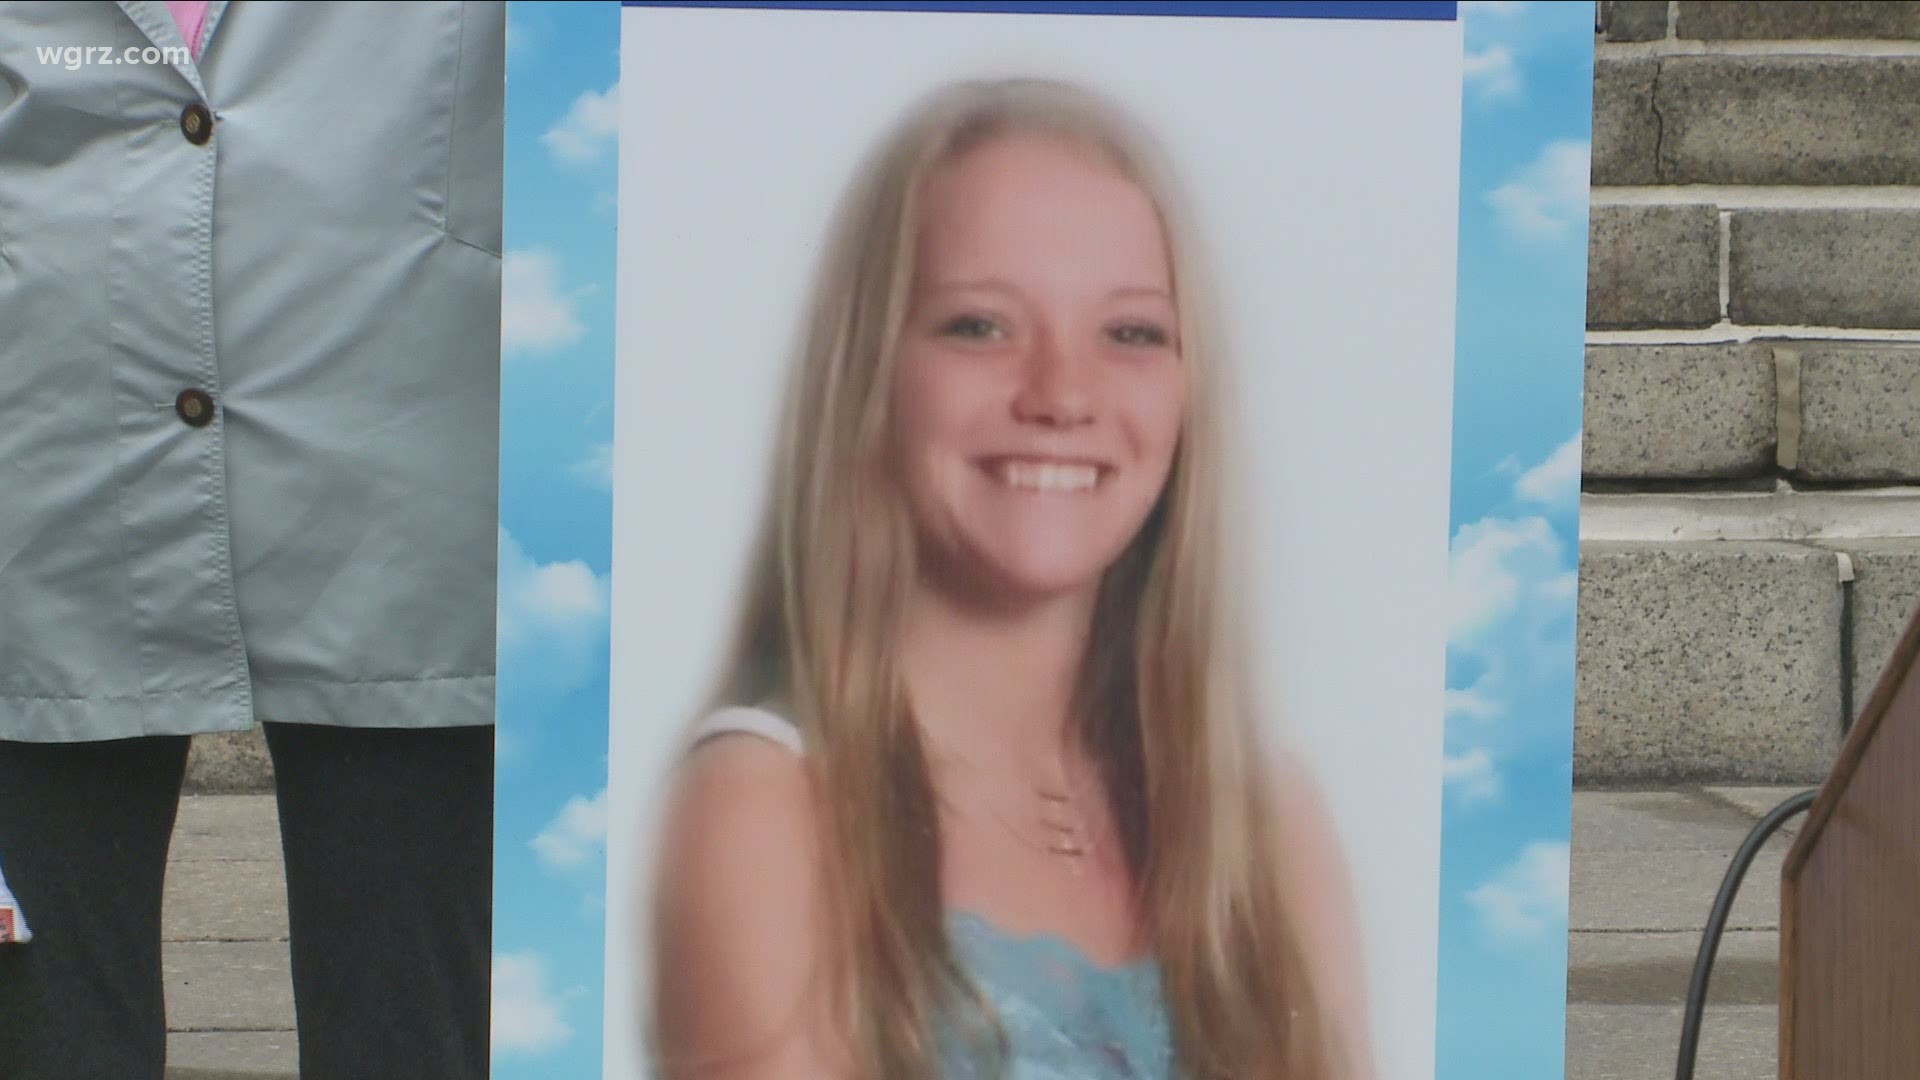 The family of Amanda Wienckowski believes she was murdered in 2009, despite an Erie County medical examiner's ruling that she overdosed.